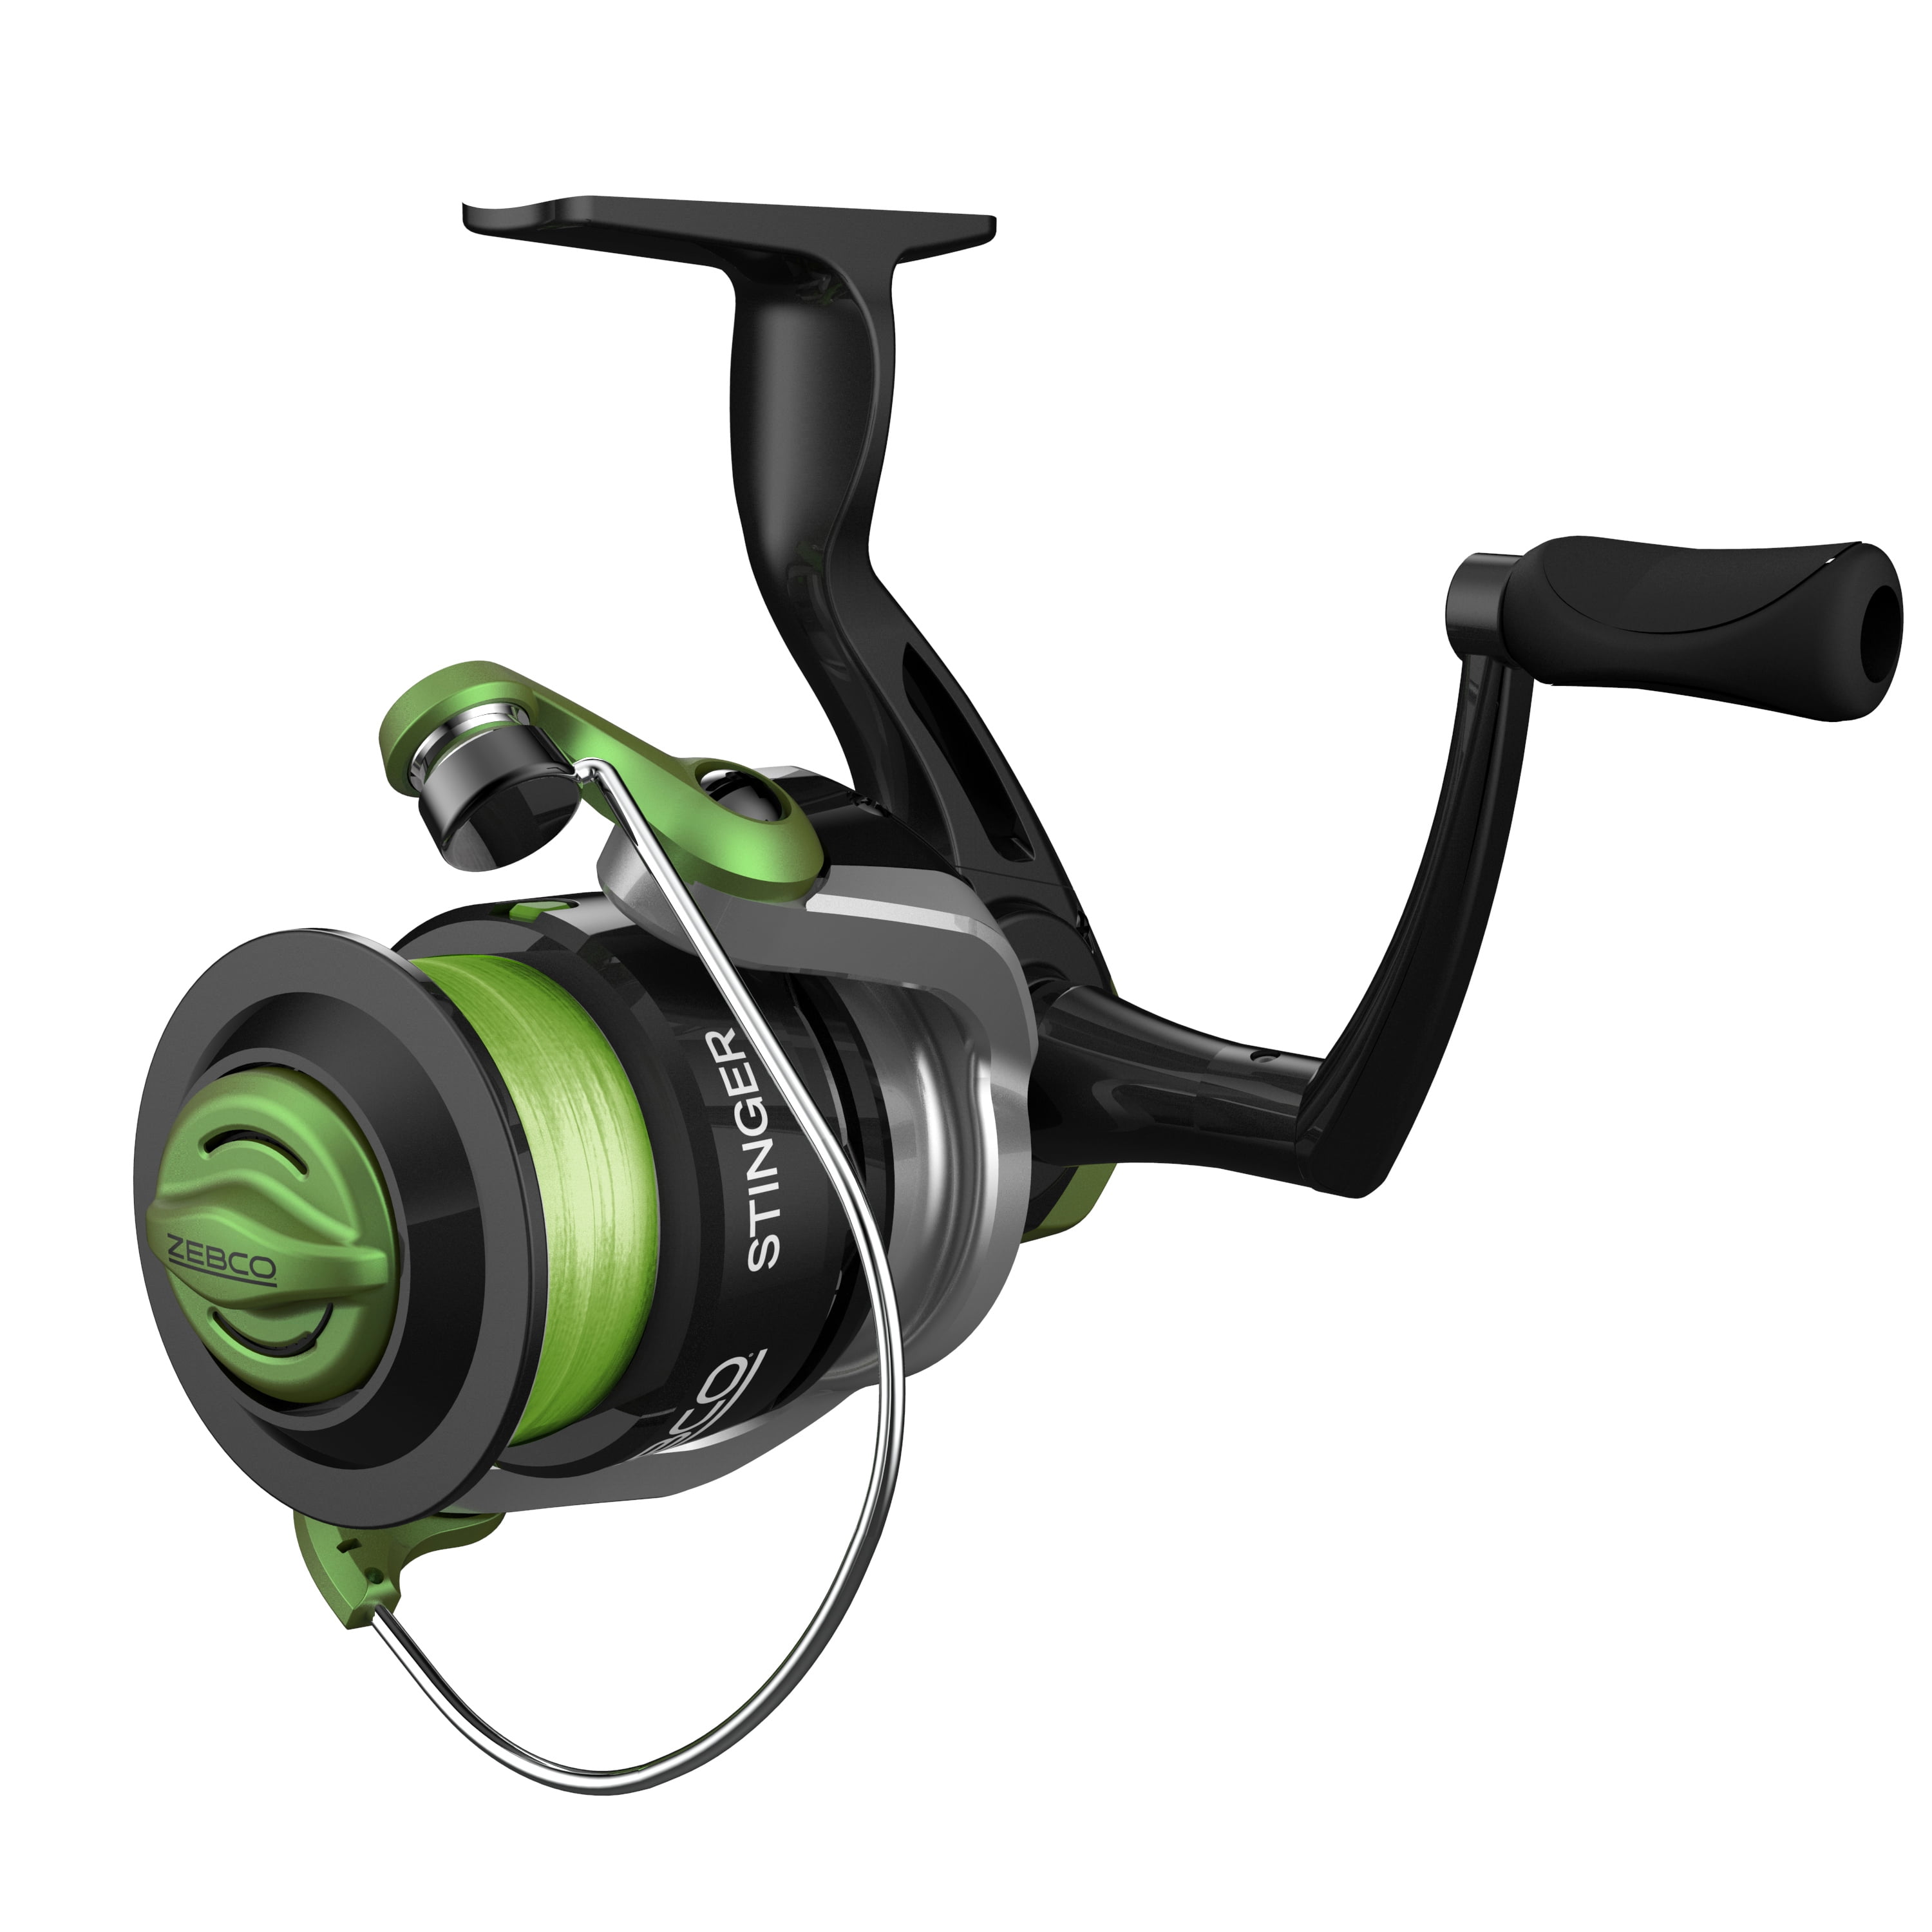 Zebco Stinger Spinning Fishing Reel, Size 30 Changeable Right- or